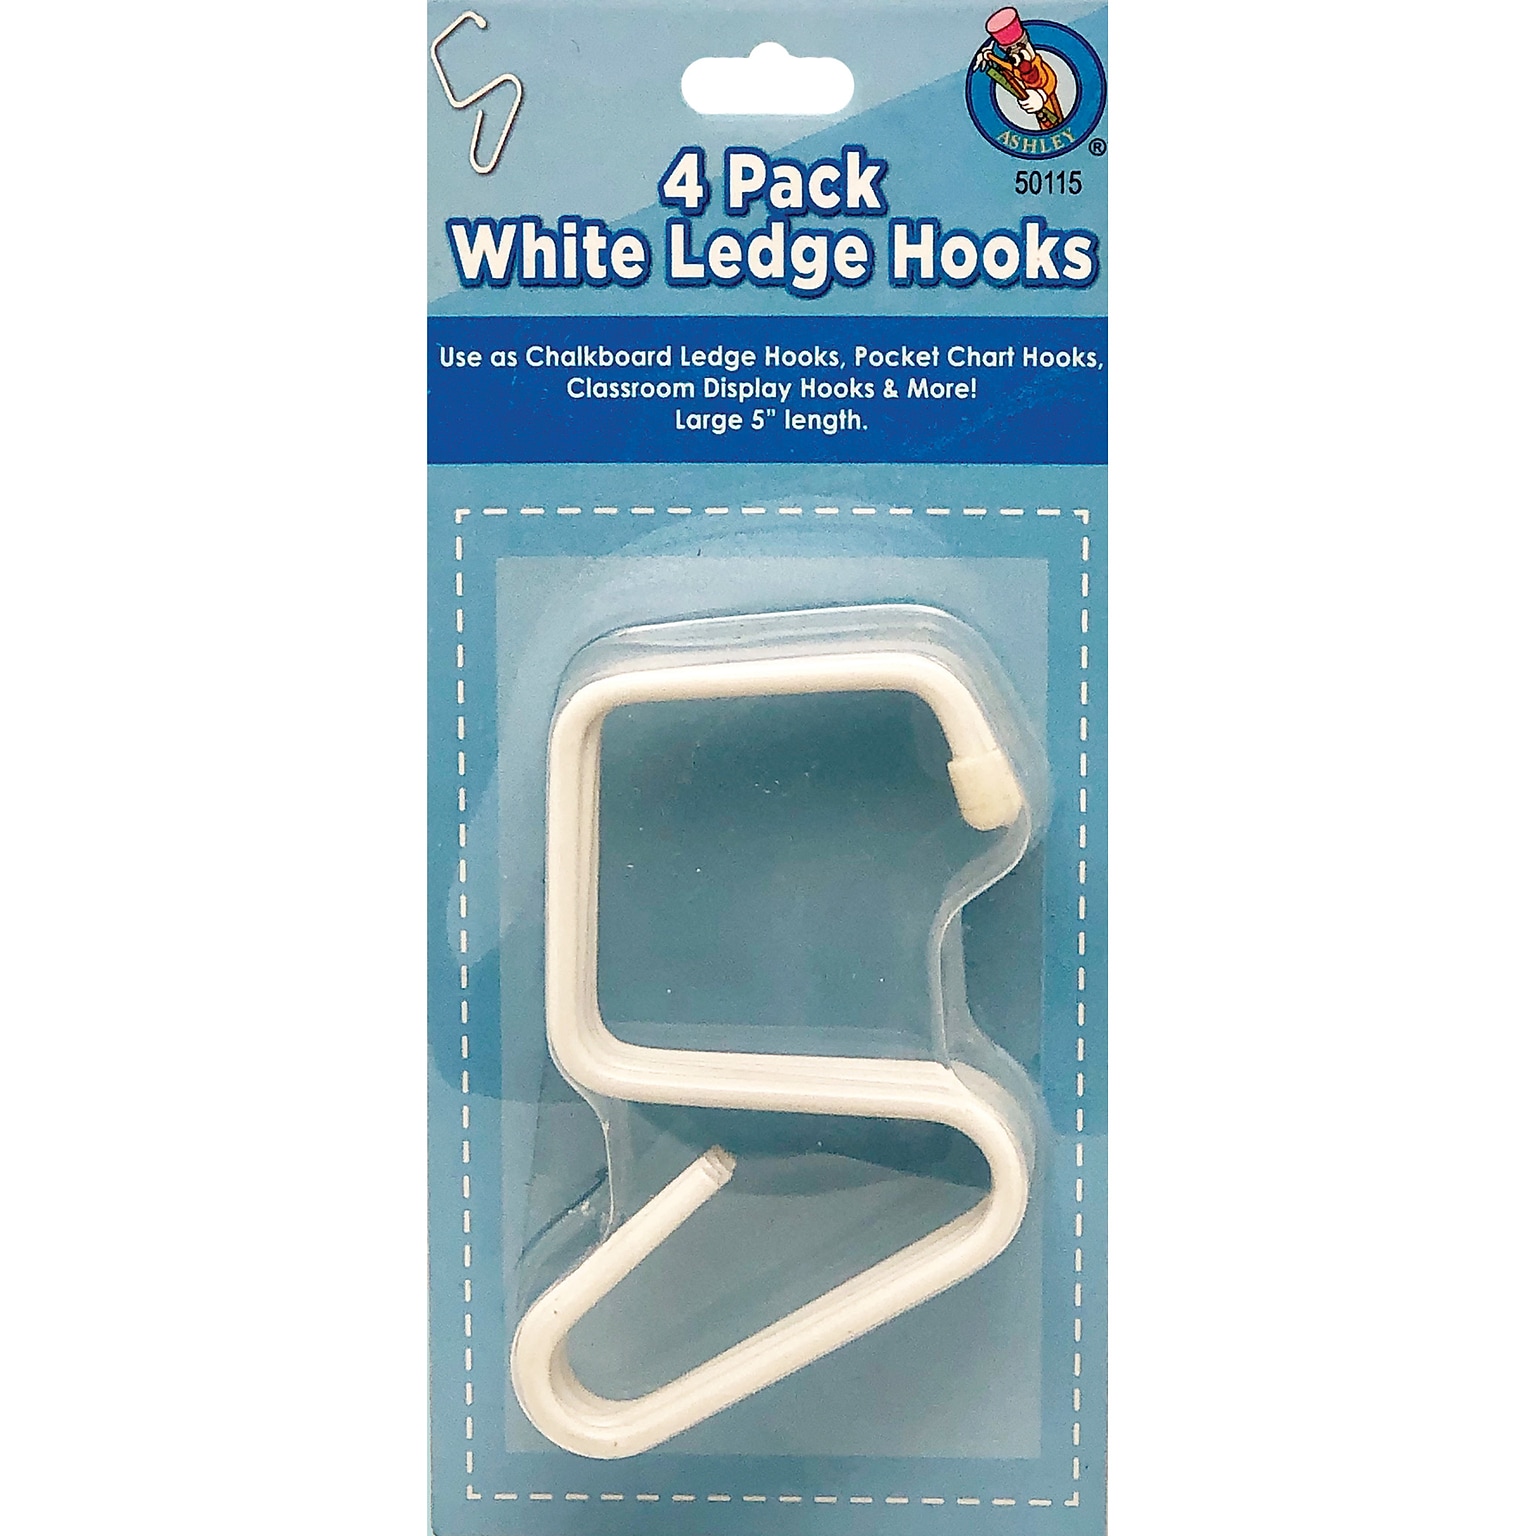 Ashley Productions® Steel/Rubber, Classroom Ledge Hooks for Chalkboard Trays, 5, White, Pack of 4 (ASH50115)